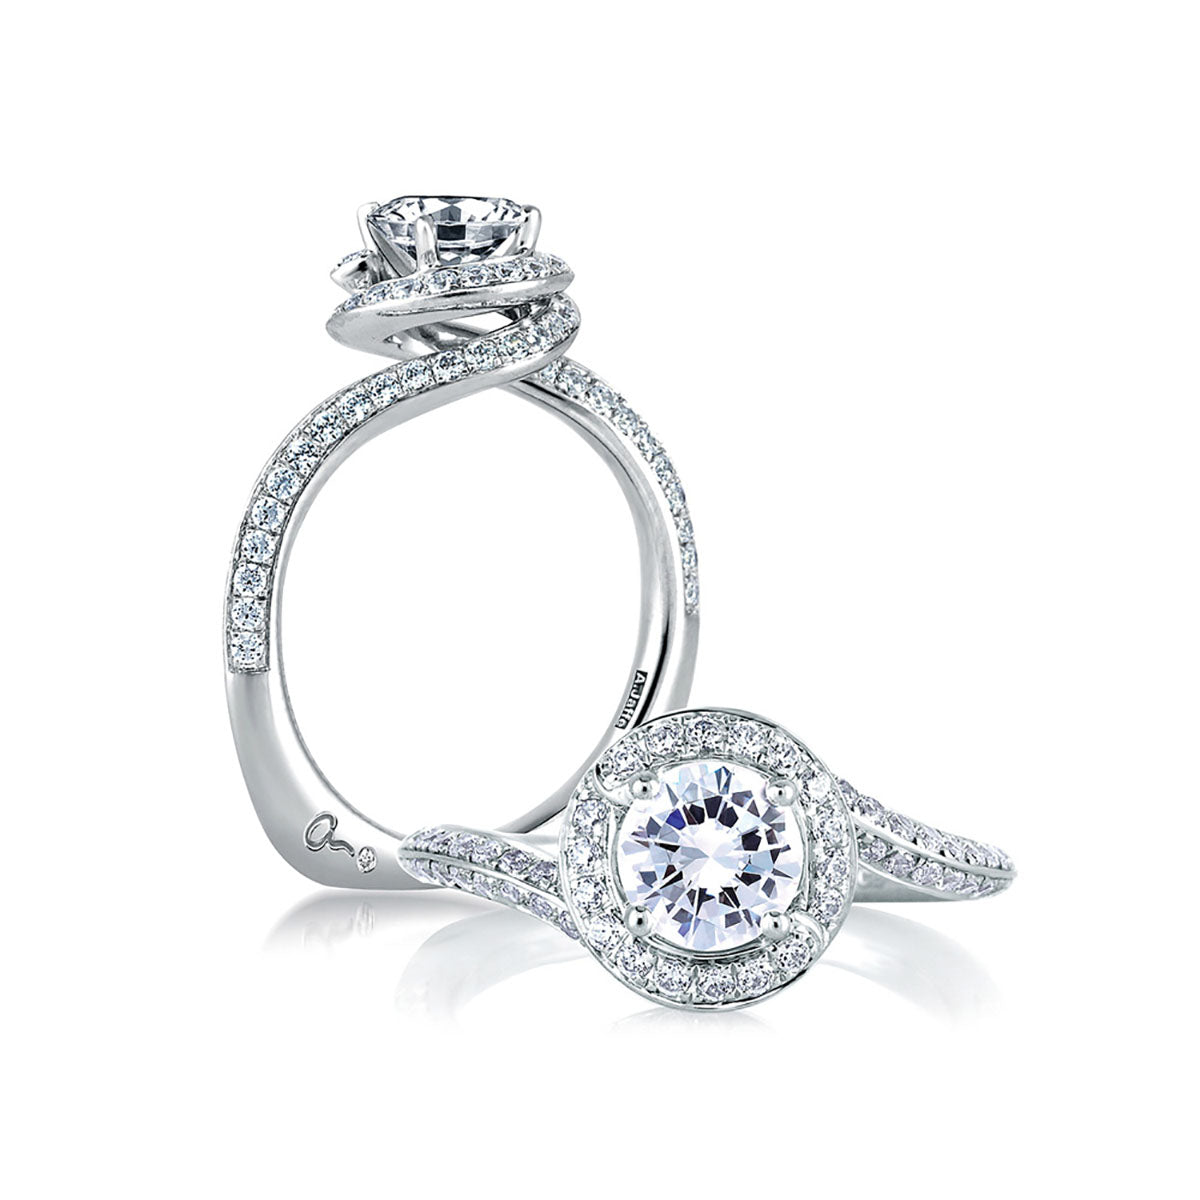 A.Jaffe Signature Spiral Halo Diamond Engagement Ring MES322/125